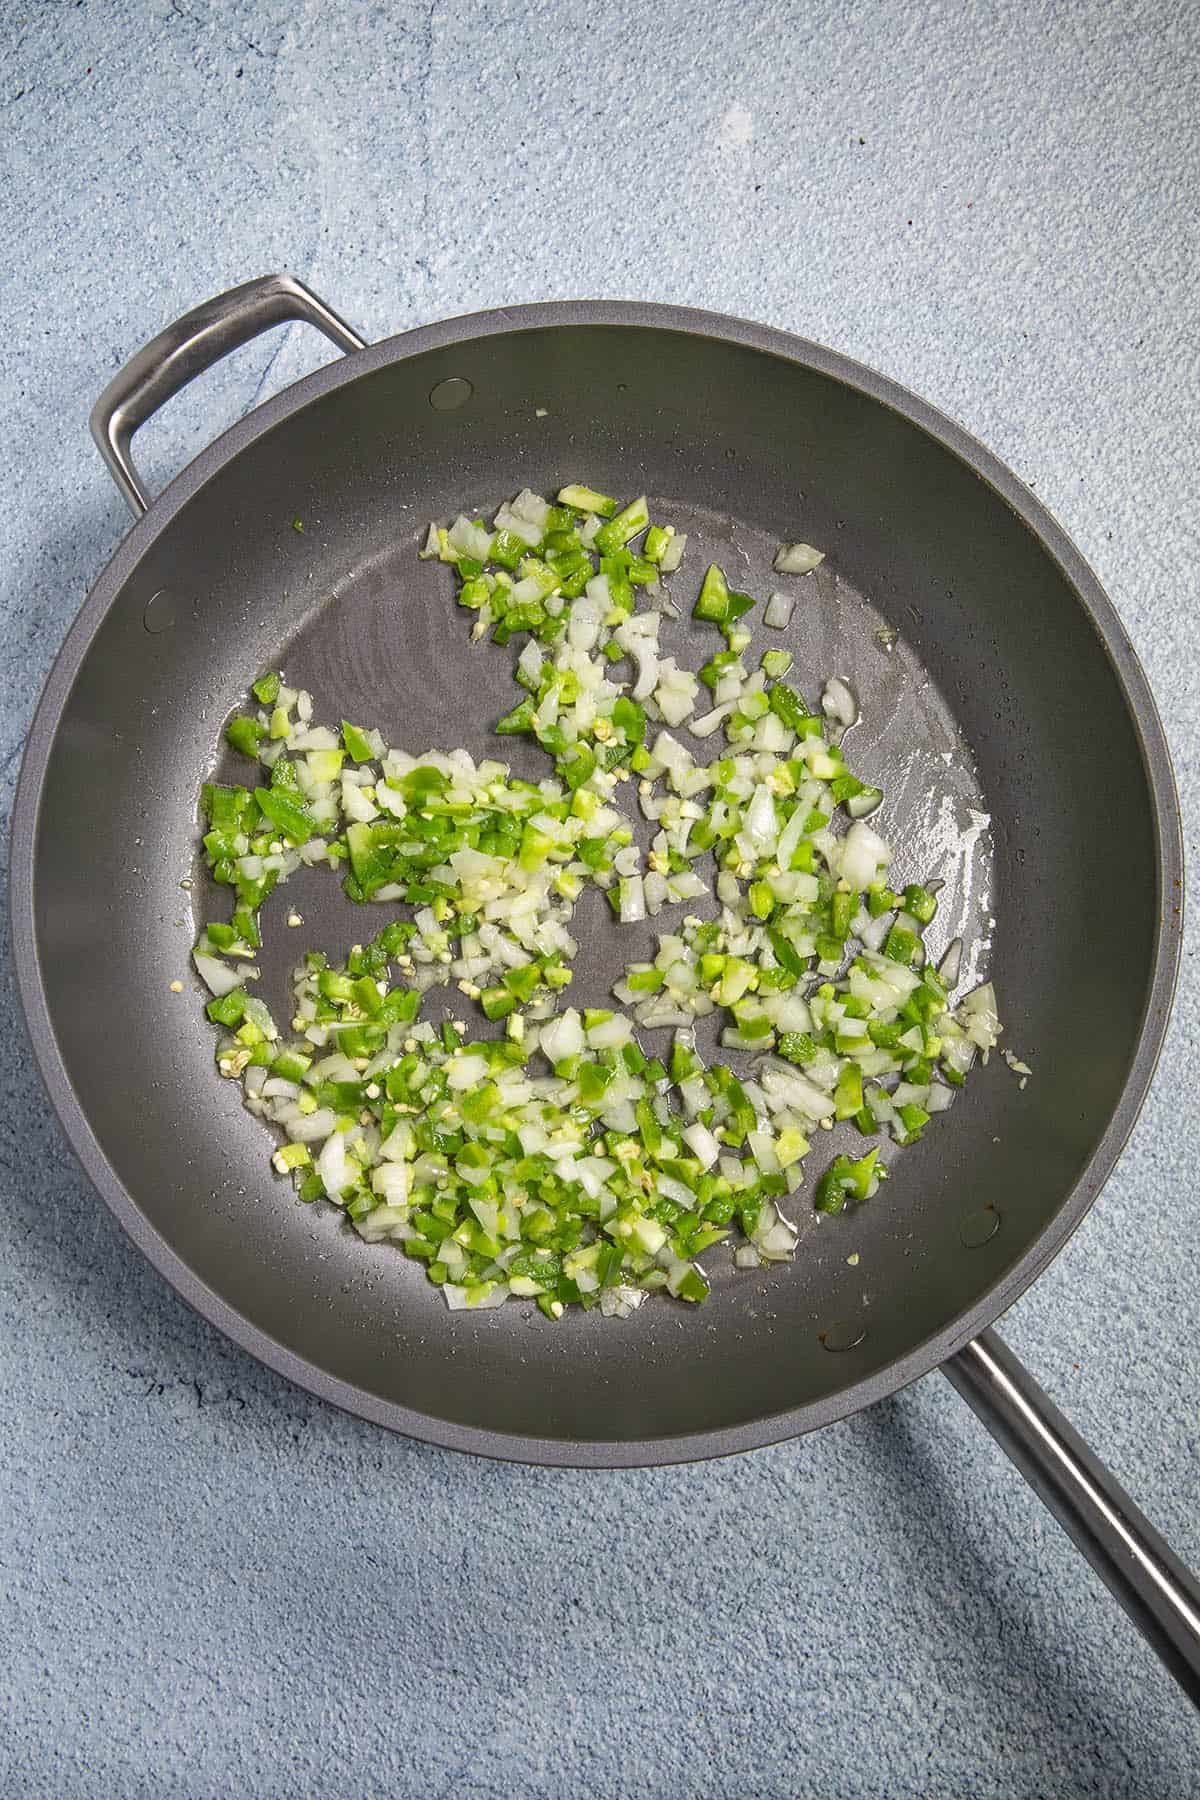 Cooking peppers and onions in a hot pan